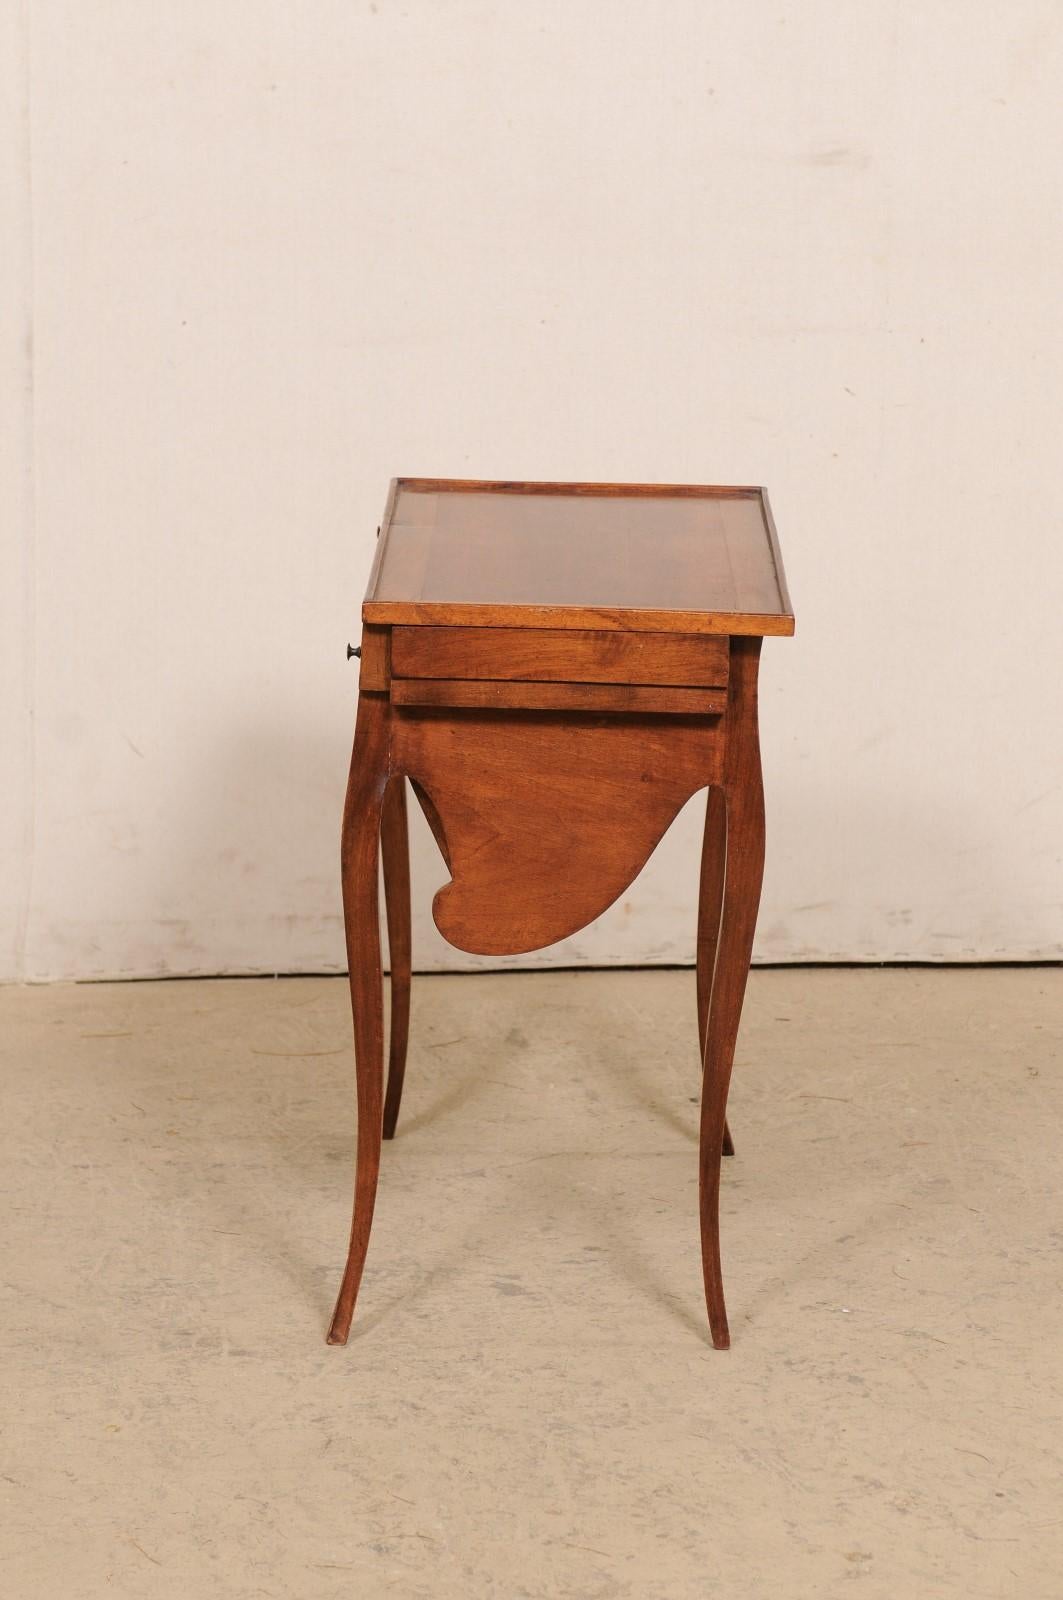 19th Century French 19th C. Table w/ Unusual & Creative Drop Down Storage-Great for Crafting